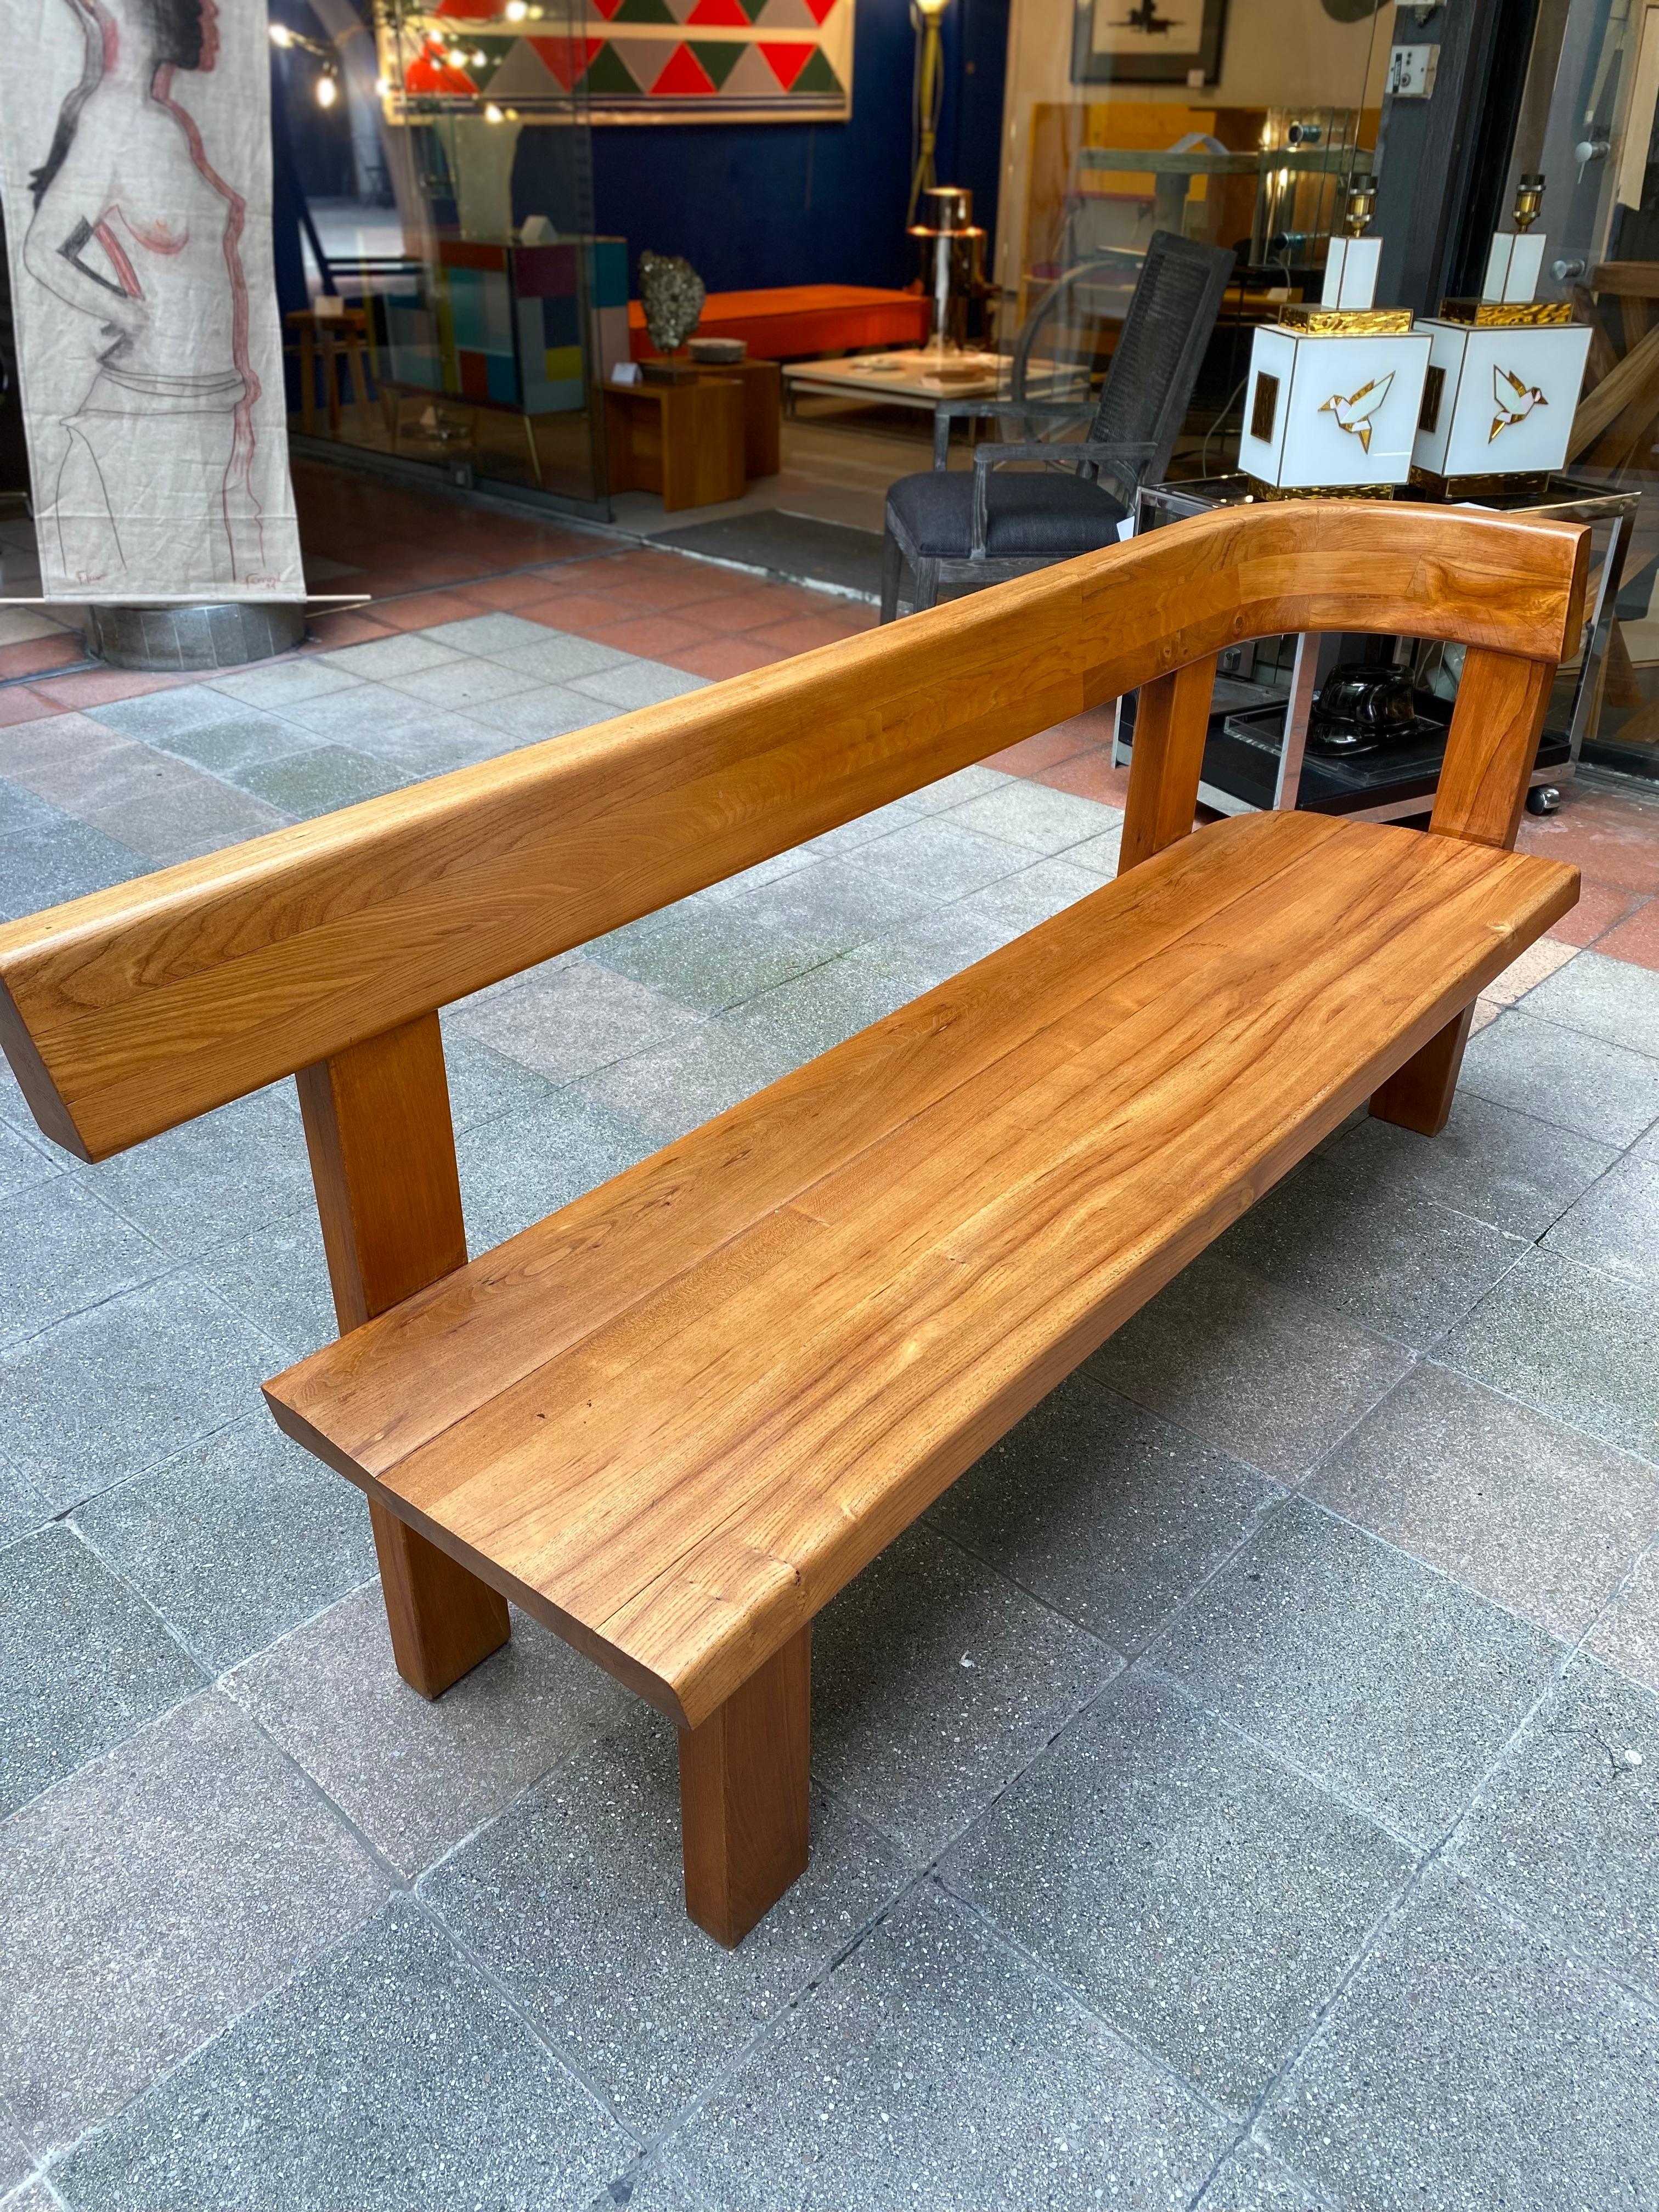 Bench by P. Chapo
Measures: W 100cm x D 47 cm x H 84 cm 
Elm 
1970
Price : 4900 € for the bench.